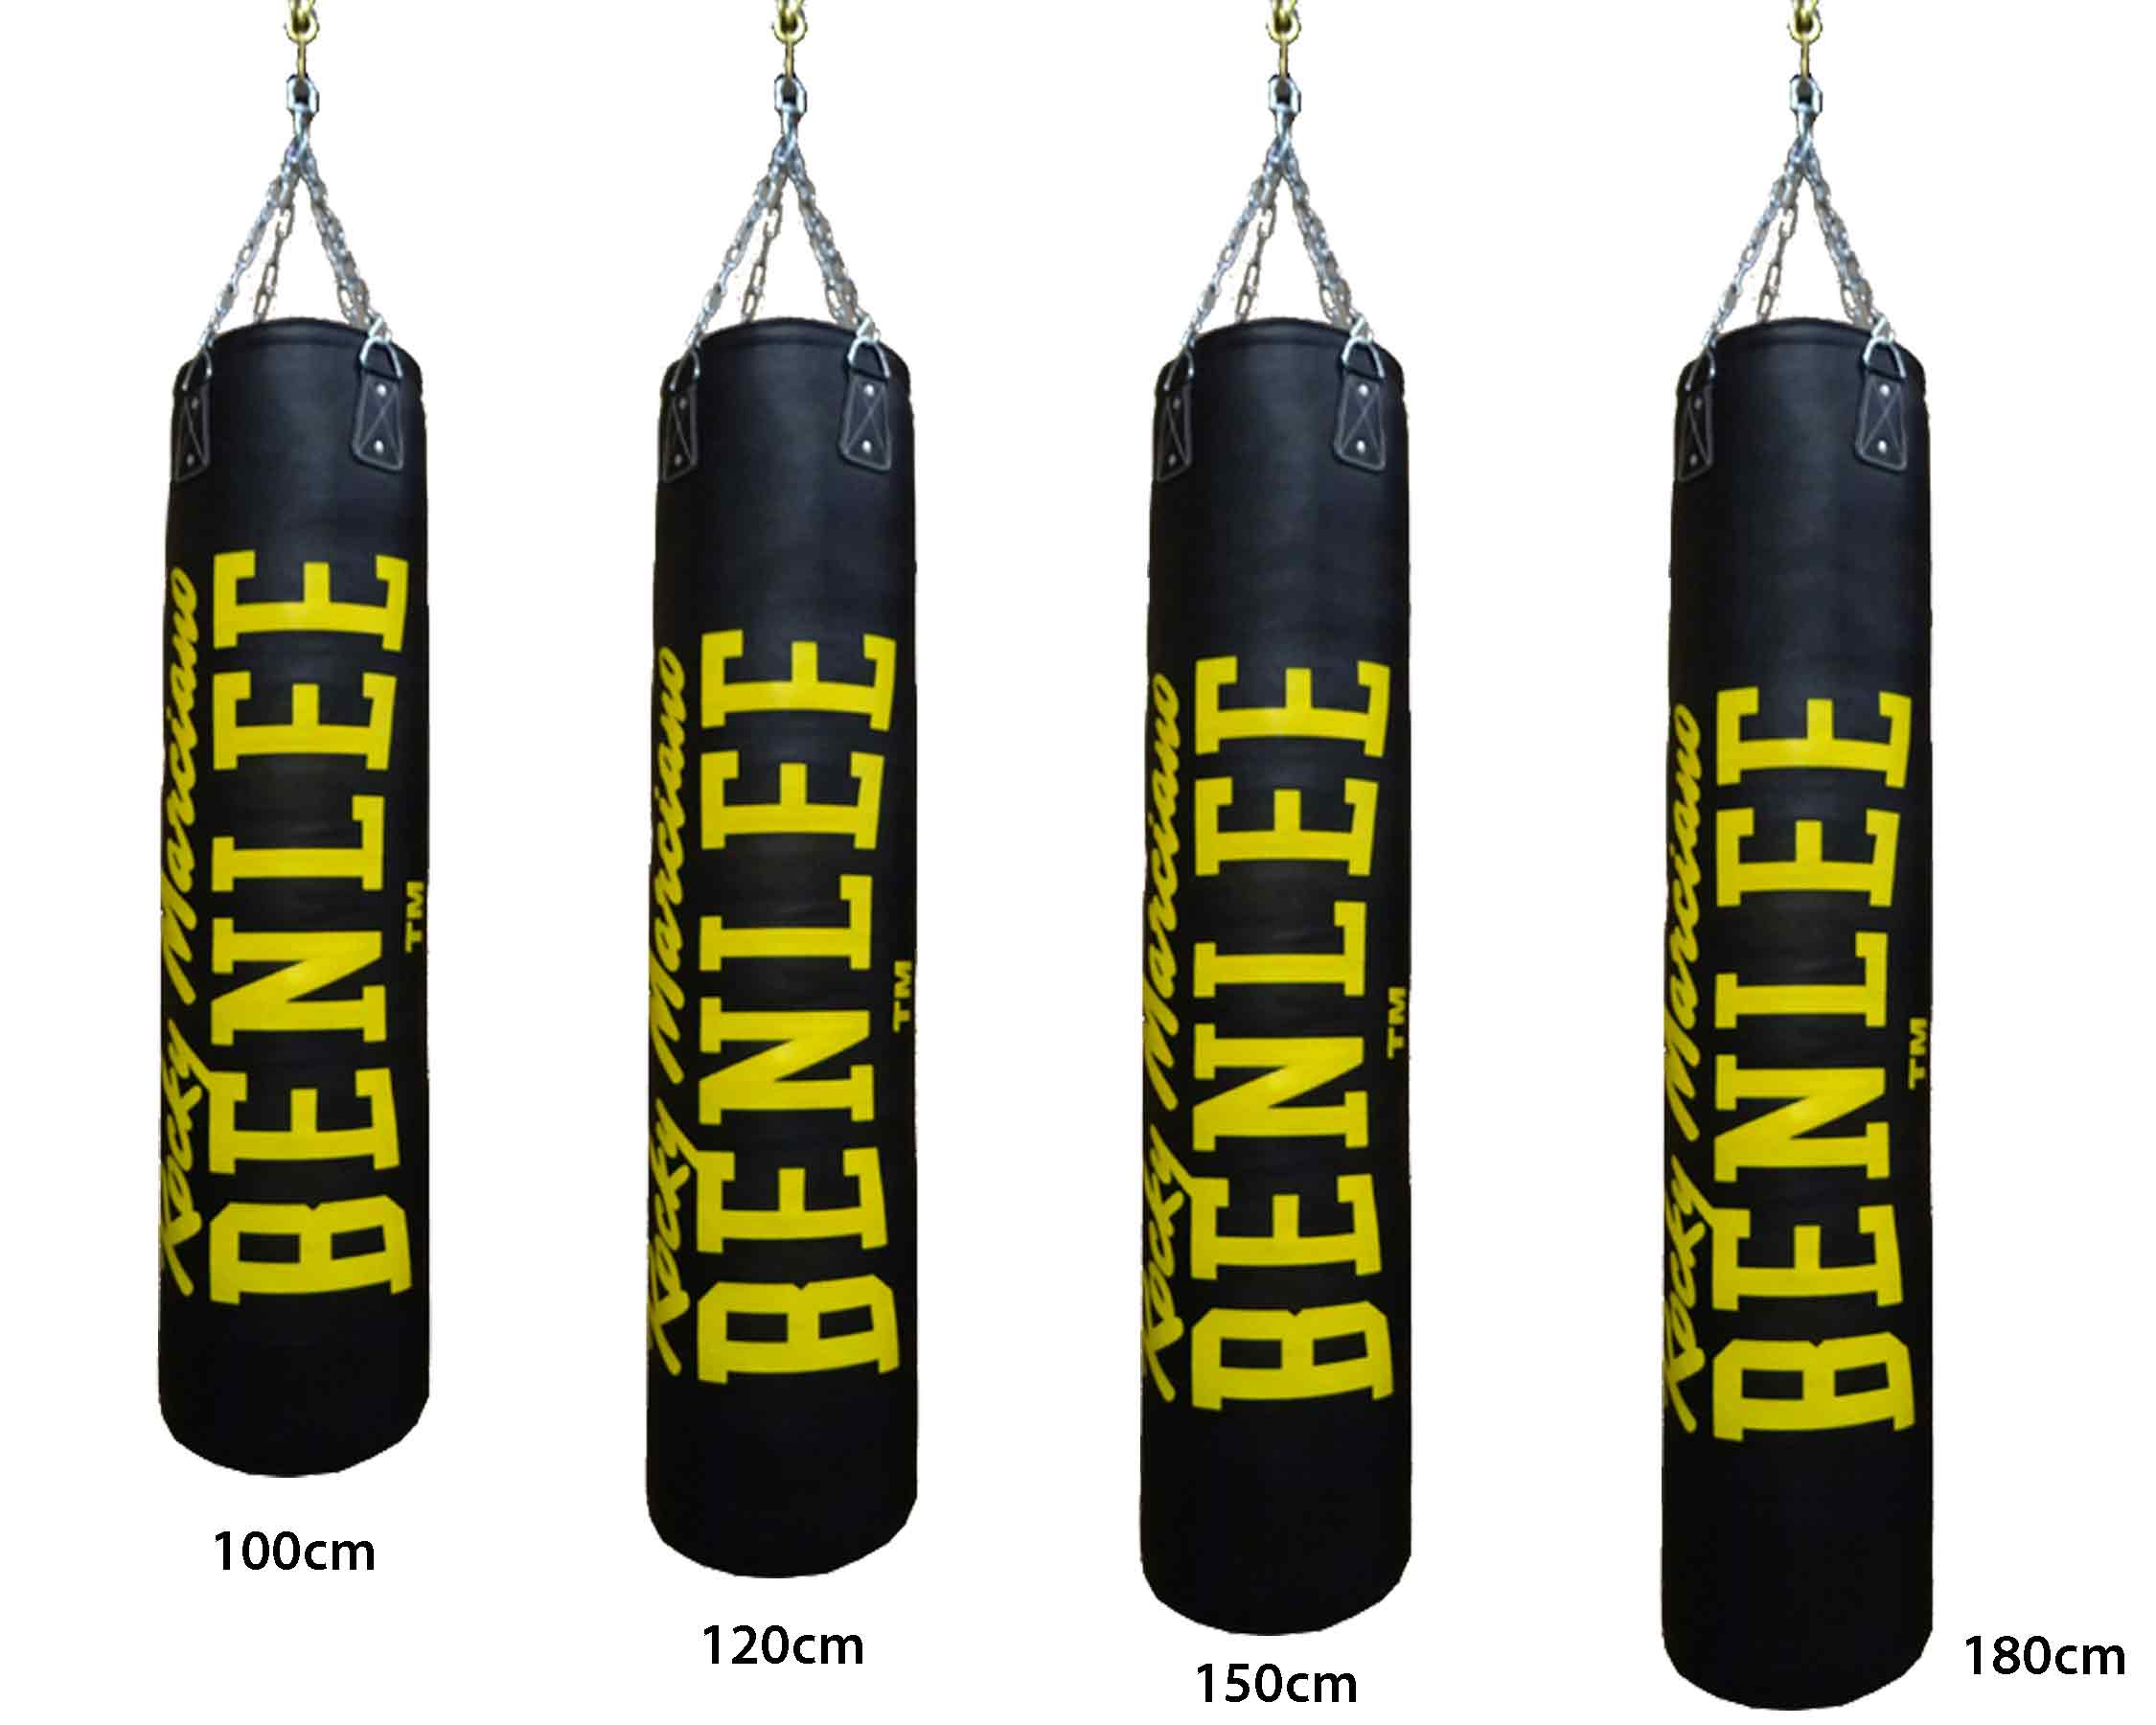 BenLee punchbag Donato 120x40cm - Punchbags - BenLee sportswear and boxing  equipment